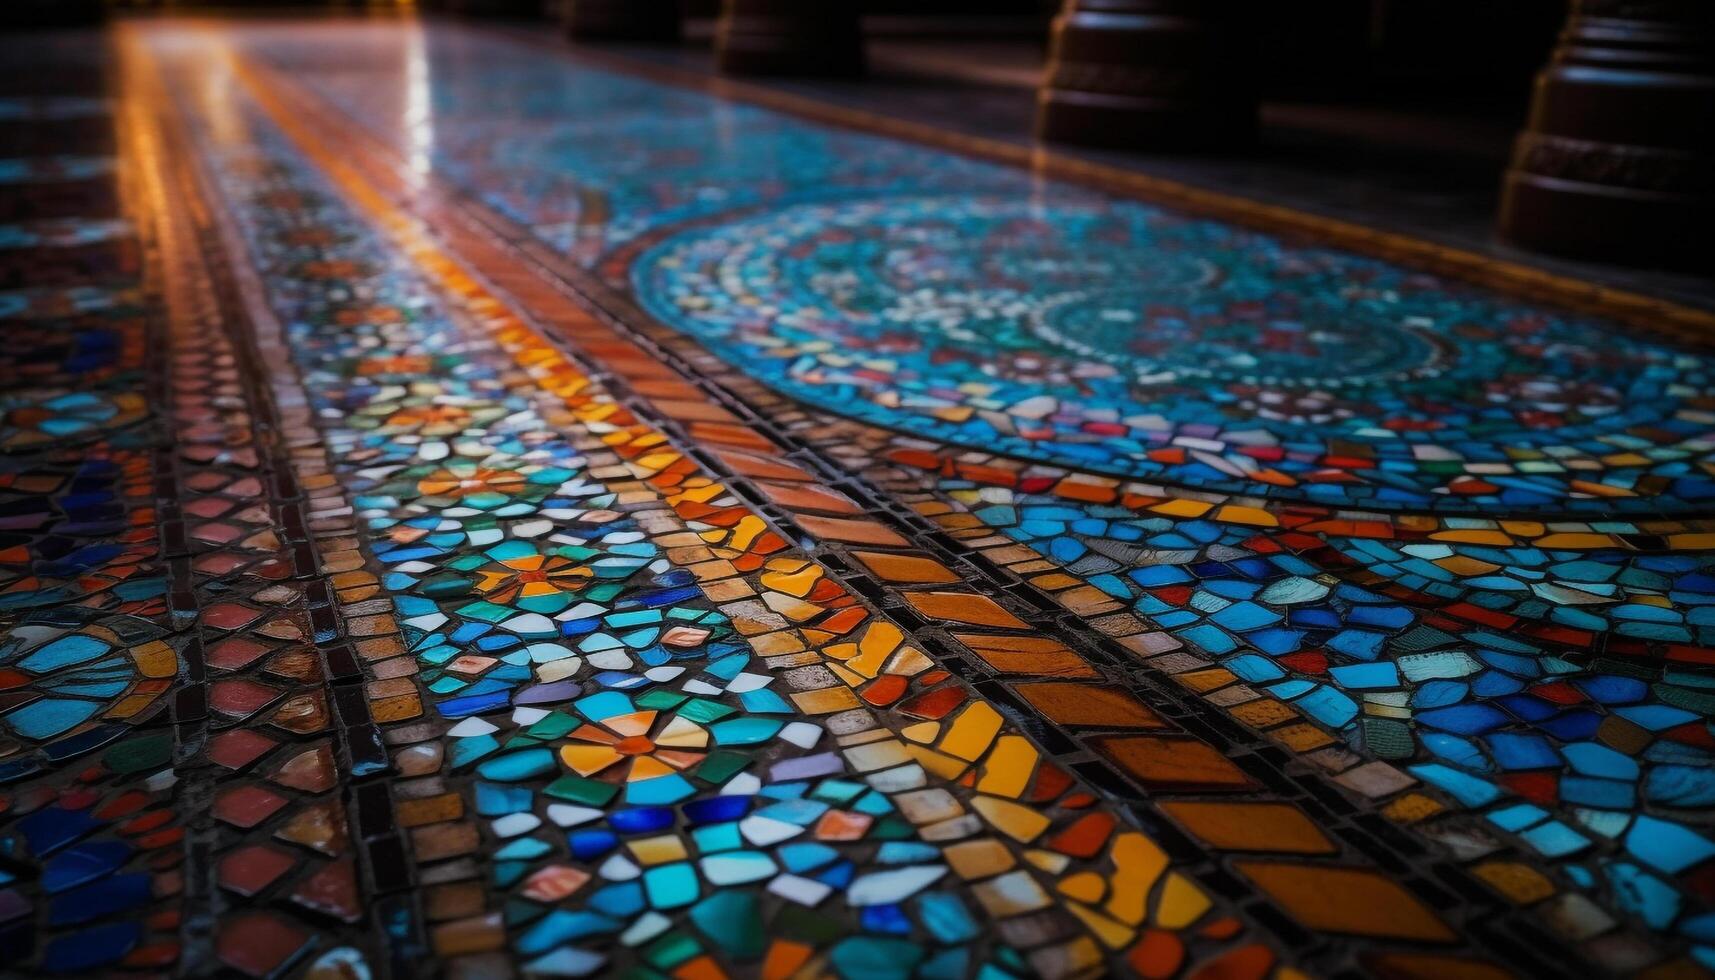 Multi colored mosaic tile flooring in ancient ornate built structure generated by AI photo